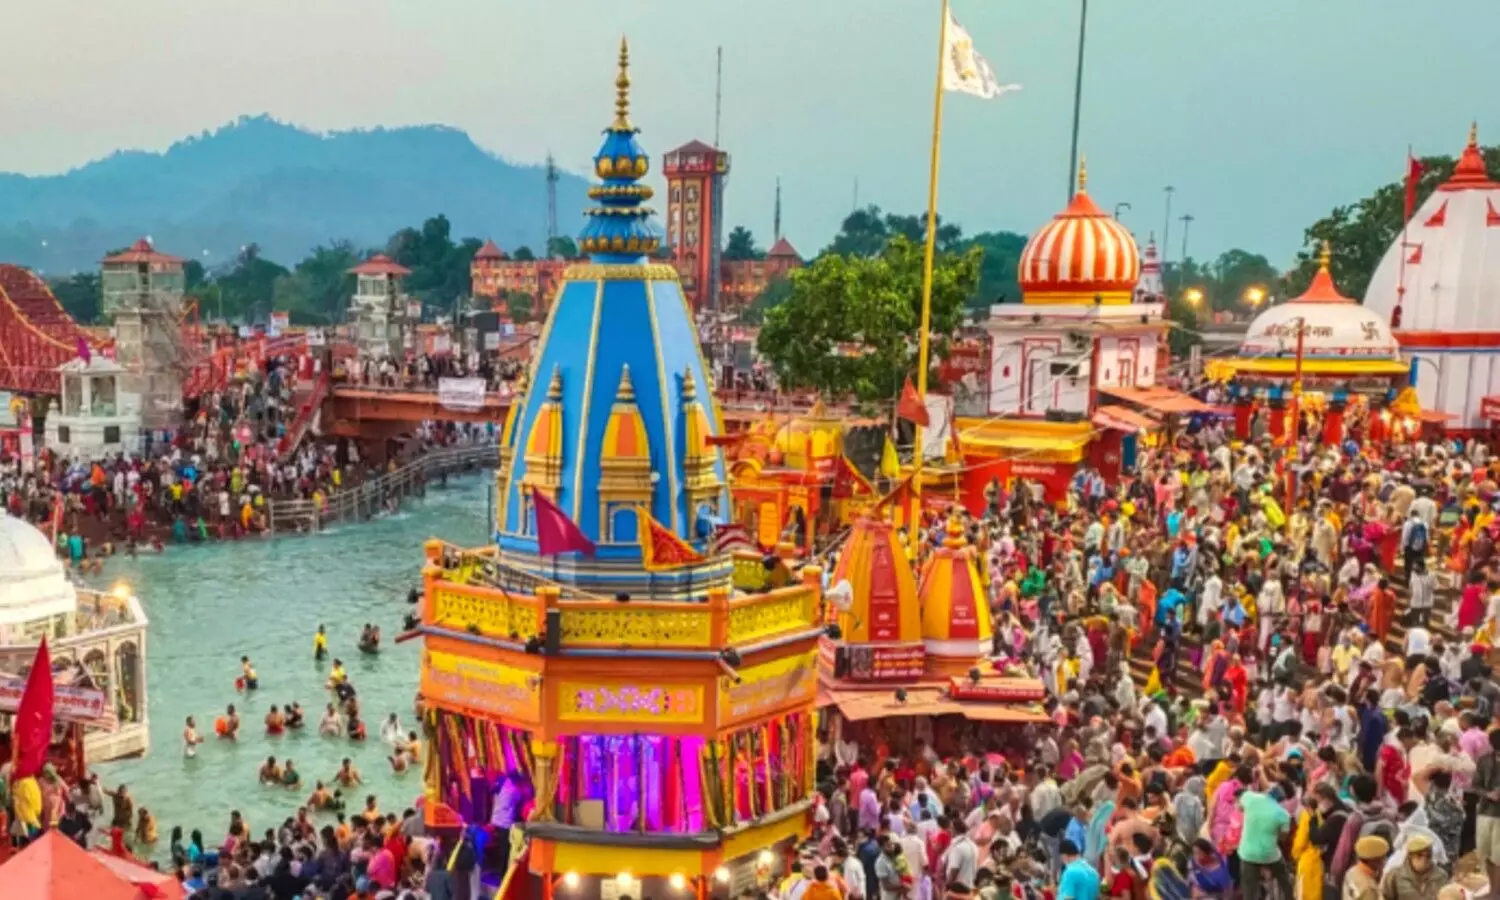 Lakhs of people came to the Kumbh Mela in Haridwar and went on spreading the infection with them.